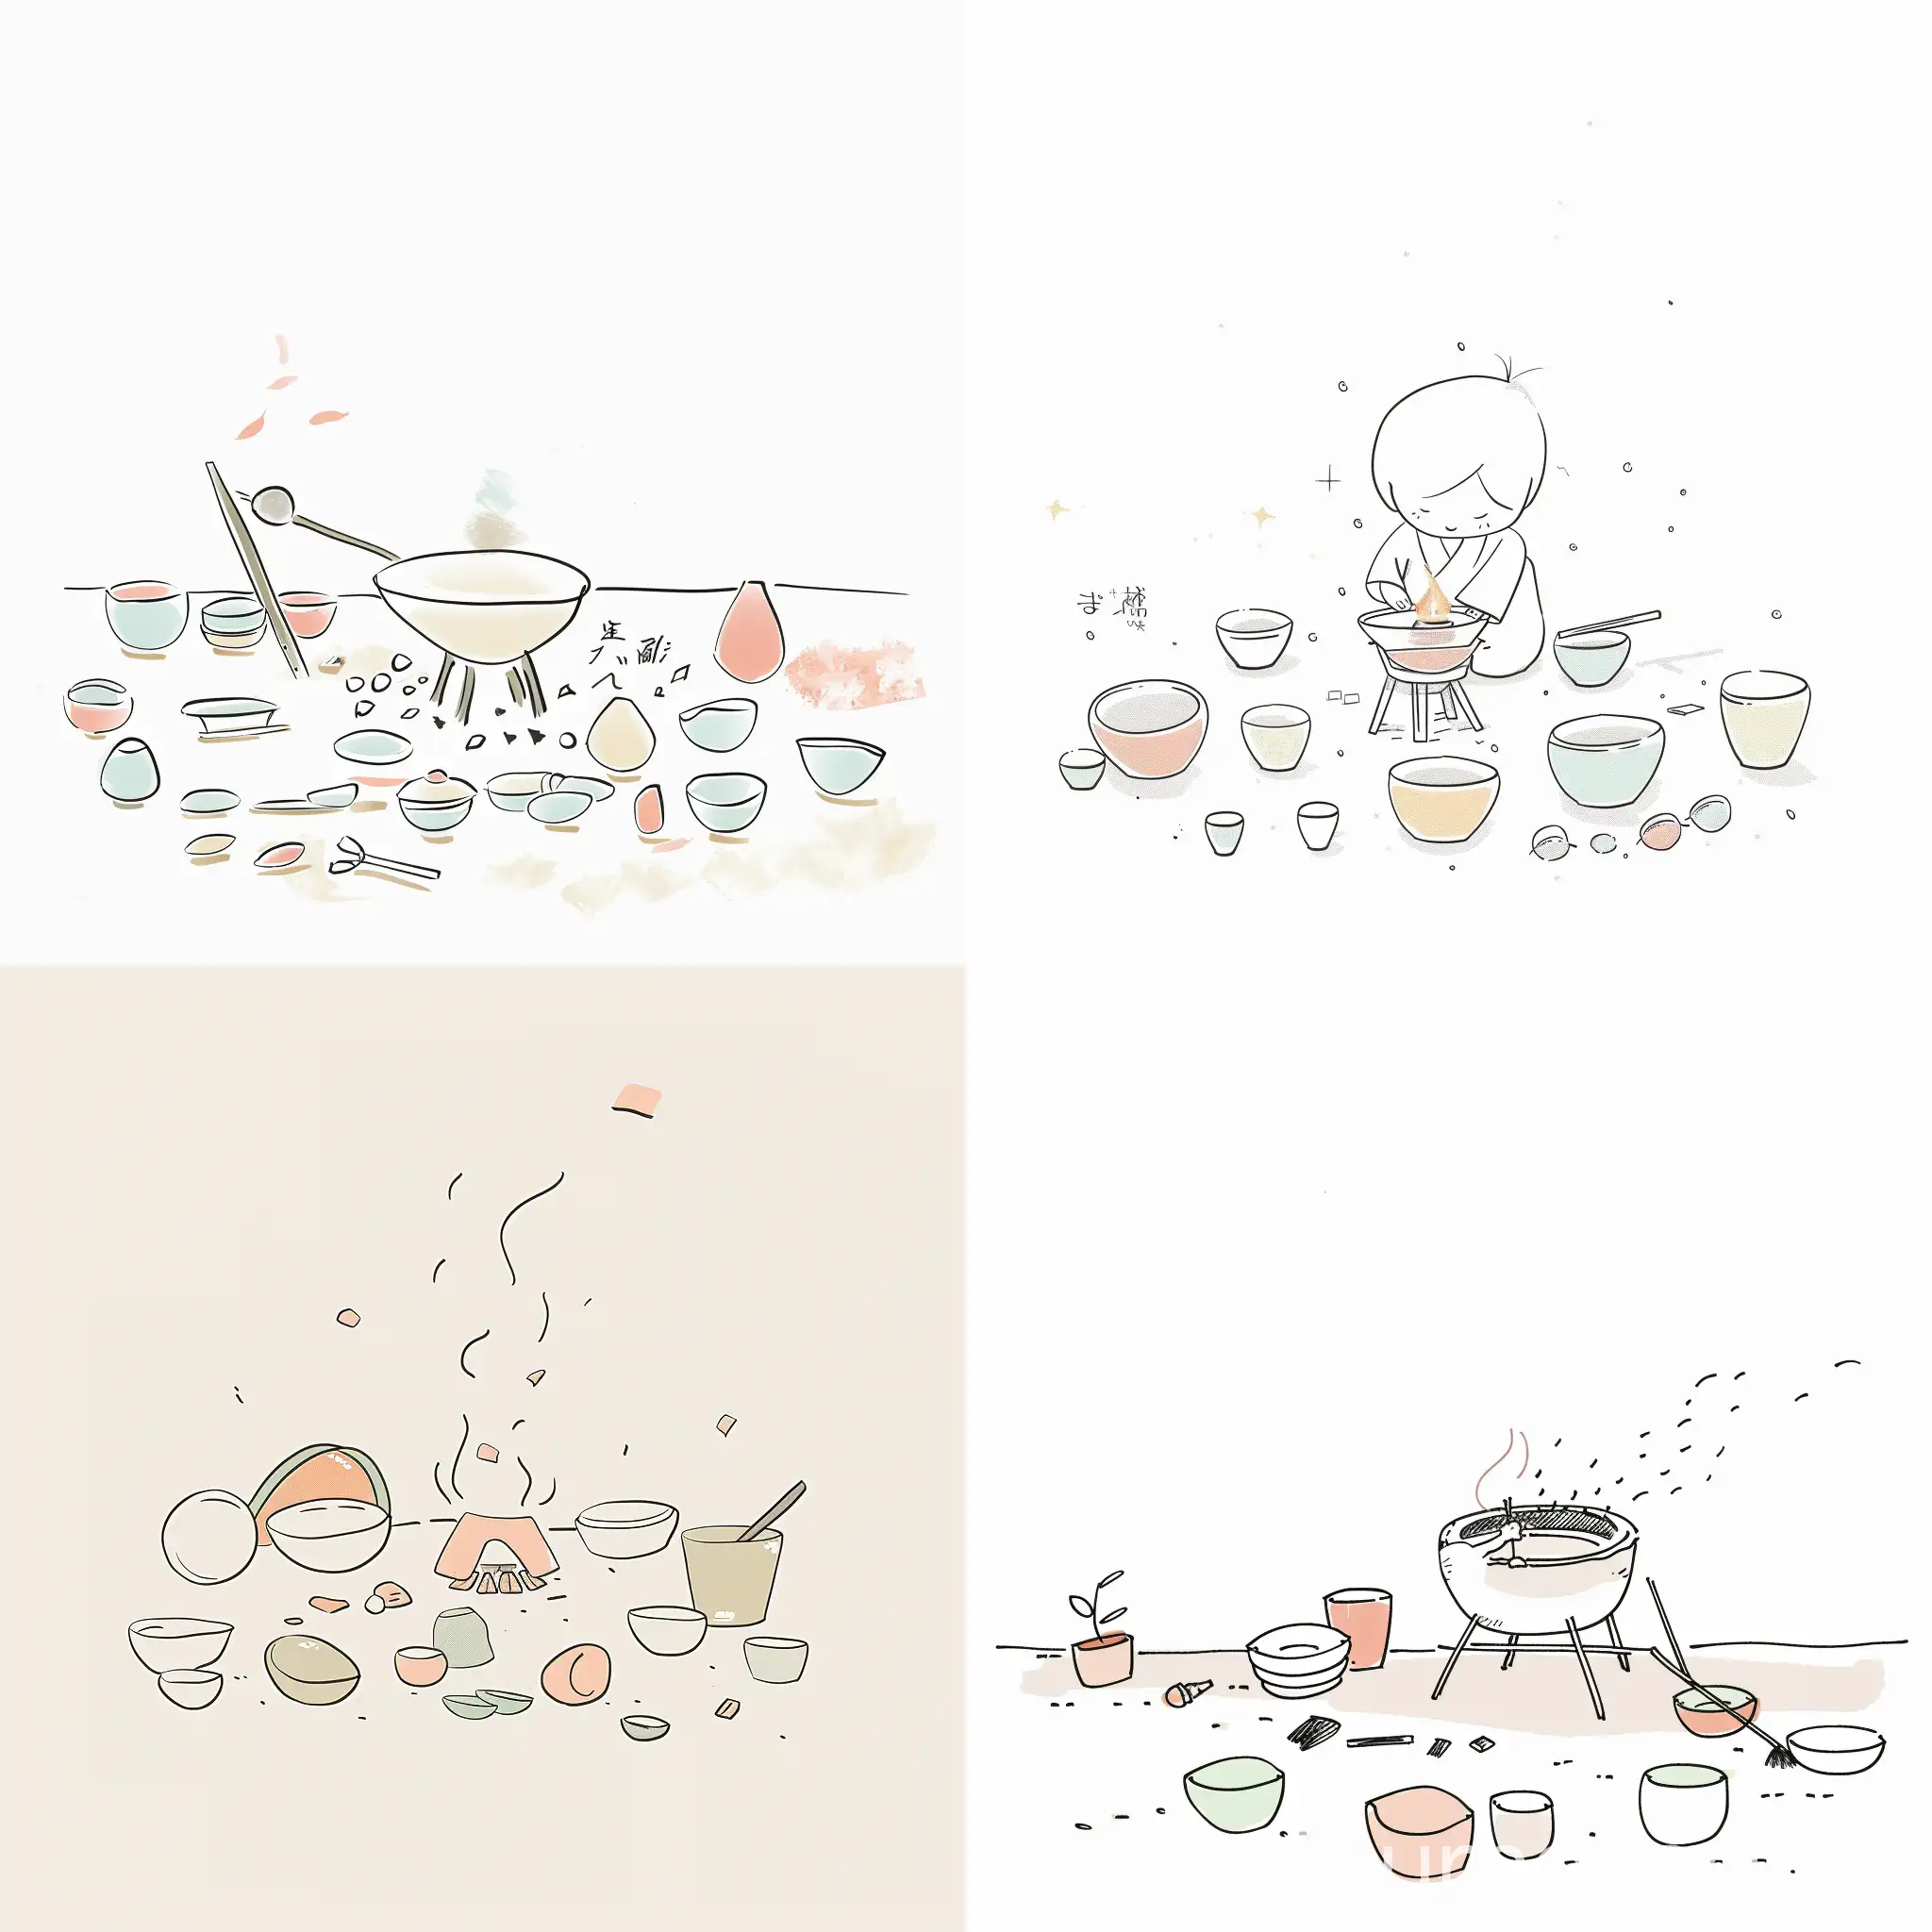 A simple sketch of ((Japanese)) making this bowl in soft pastel colors on a white background. There is a made (charcoal) brazier) and various bowl shapes in the style of bowl works lying around. It's a peaceful scene of creative expression. Minimalist aesthetic with simple lines and flat colors, single line art illustration, sparse simplicity, Y2K, cute clipart, white background